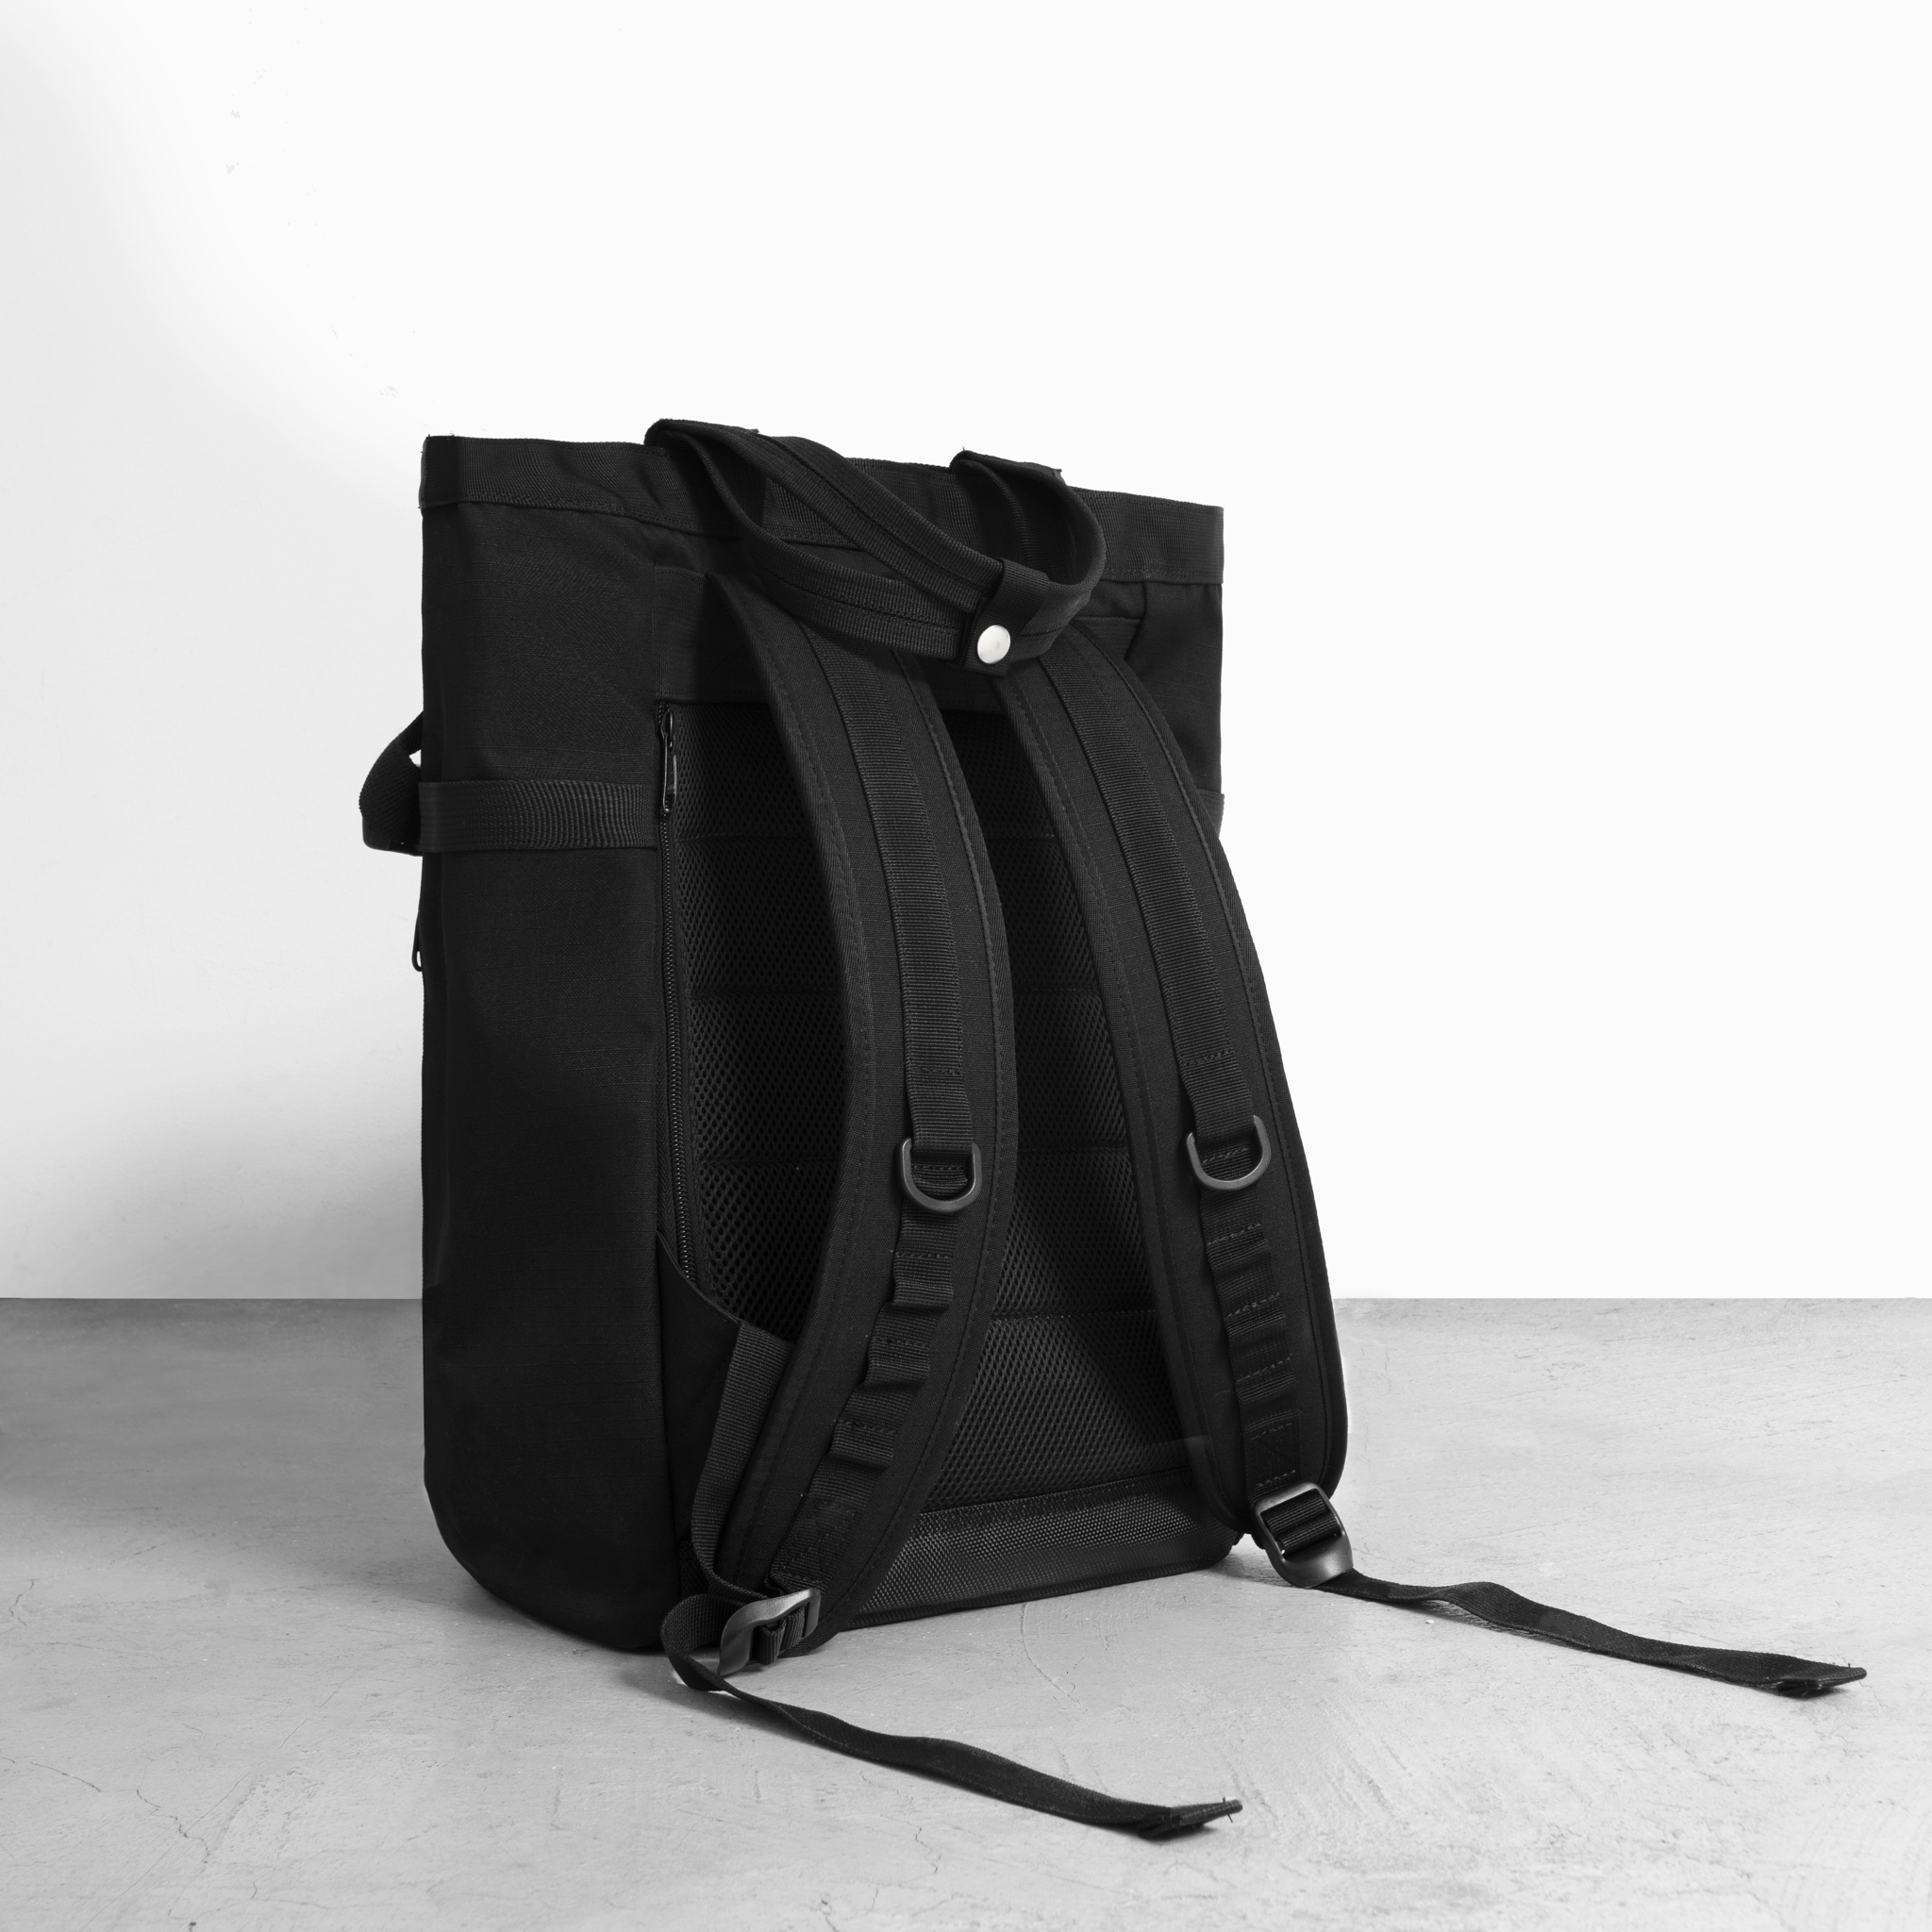  Daily Carrier Backpack "Black" 